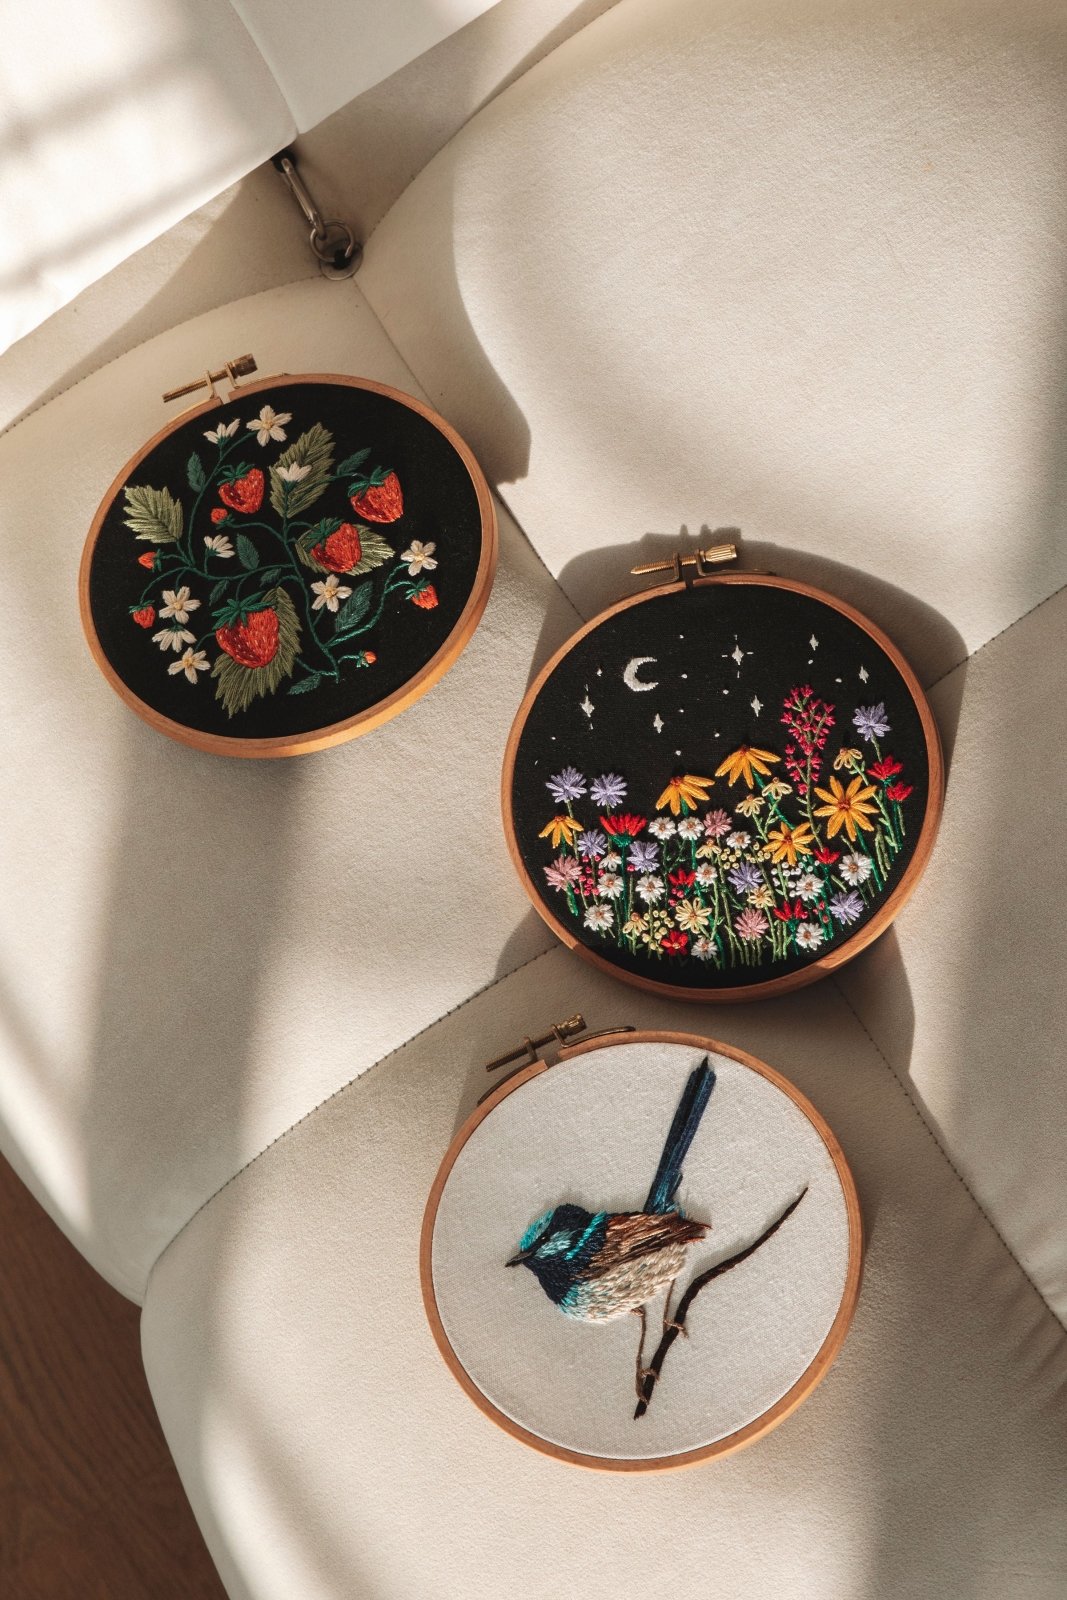 Blue Wren Embroidery Kit - Stitched Up Kits